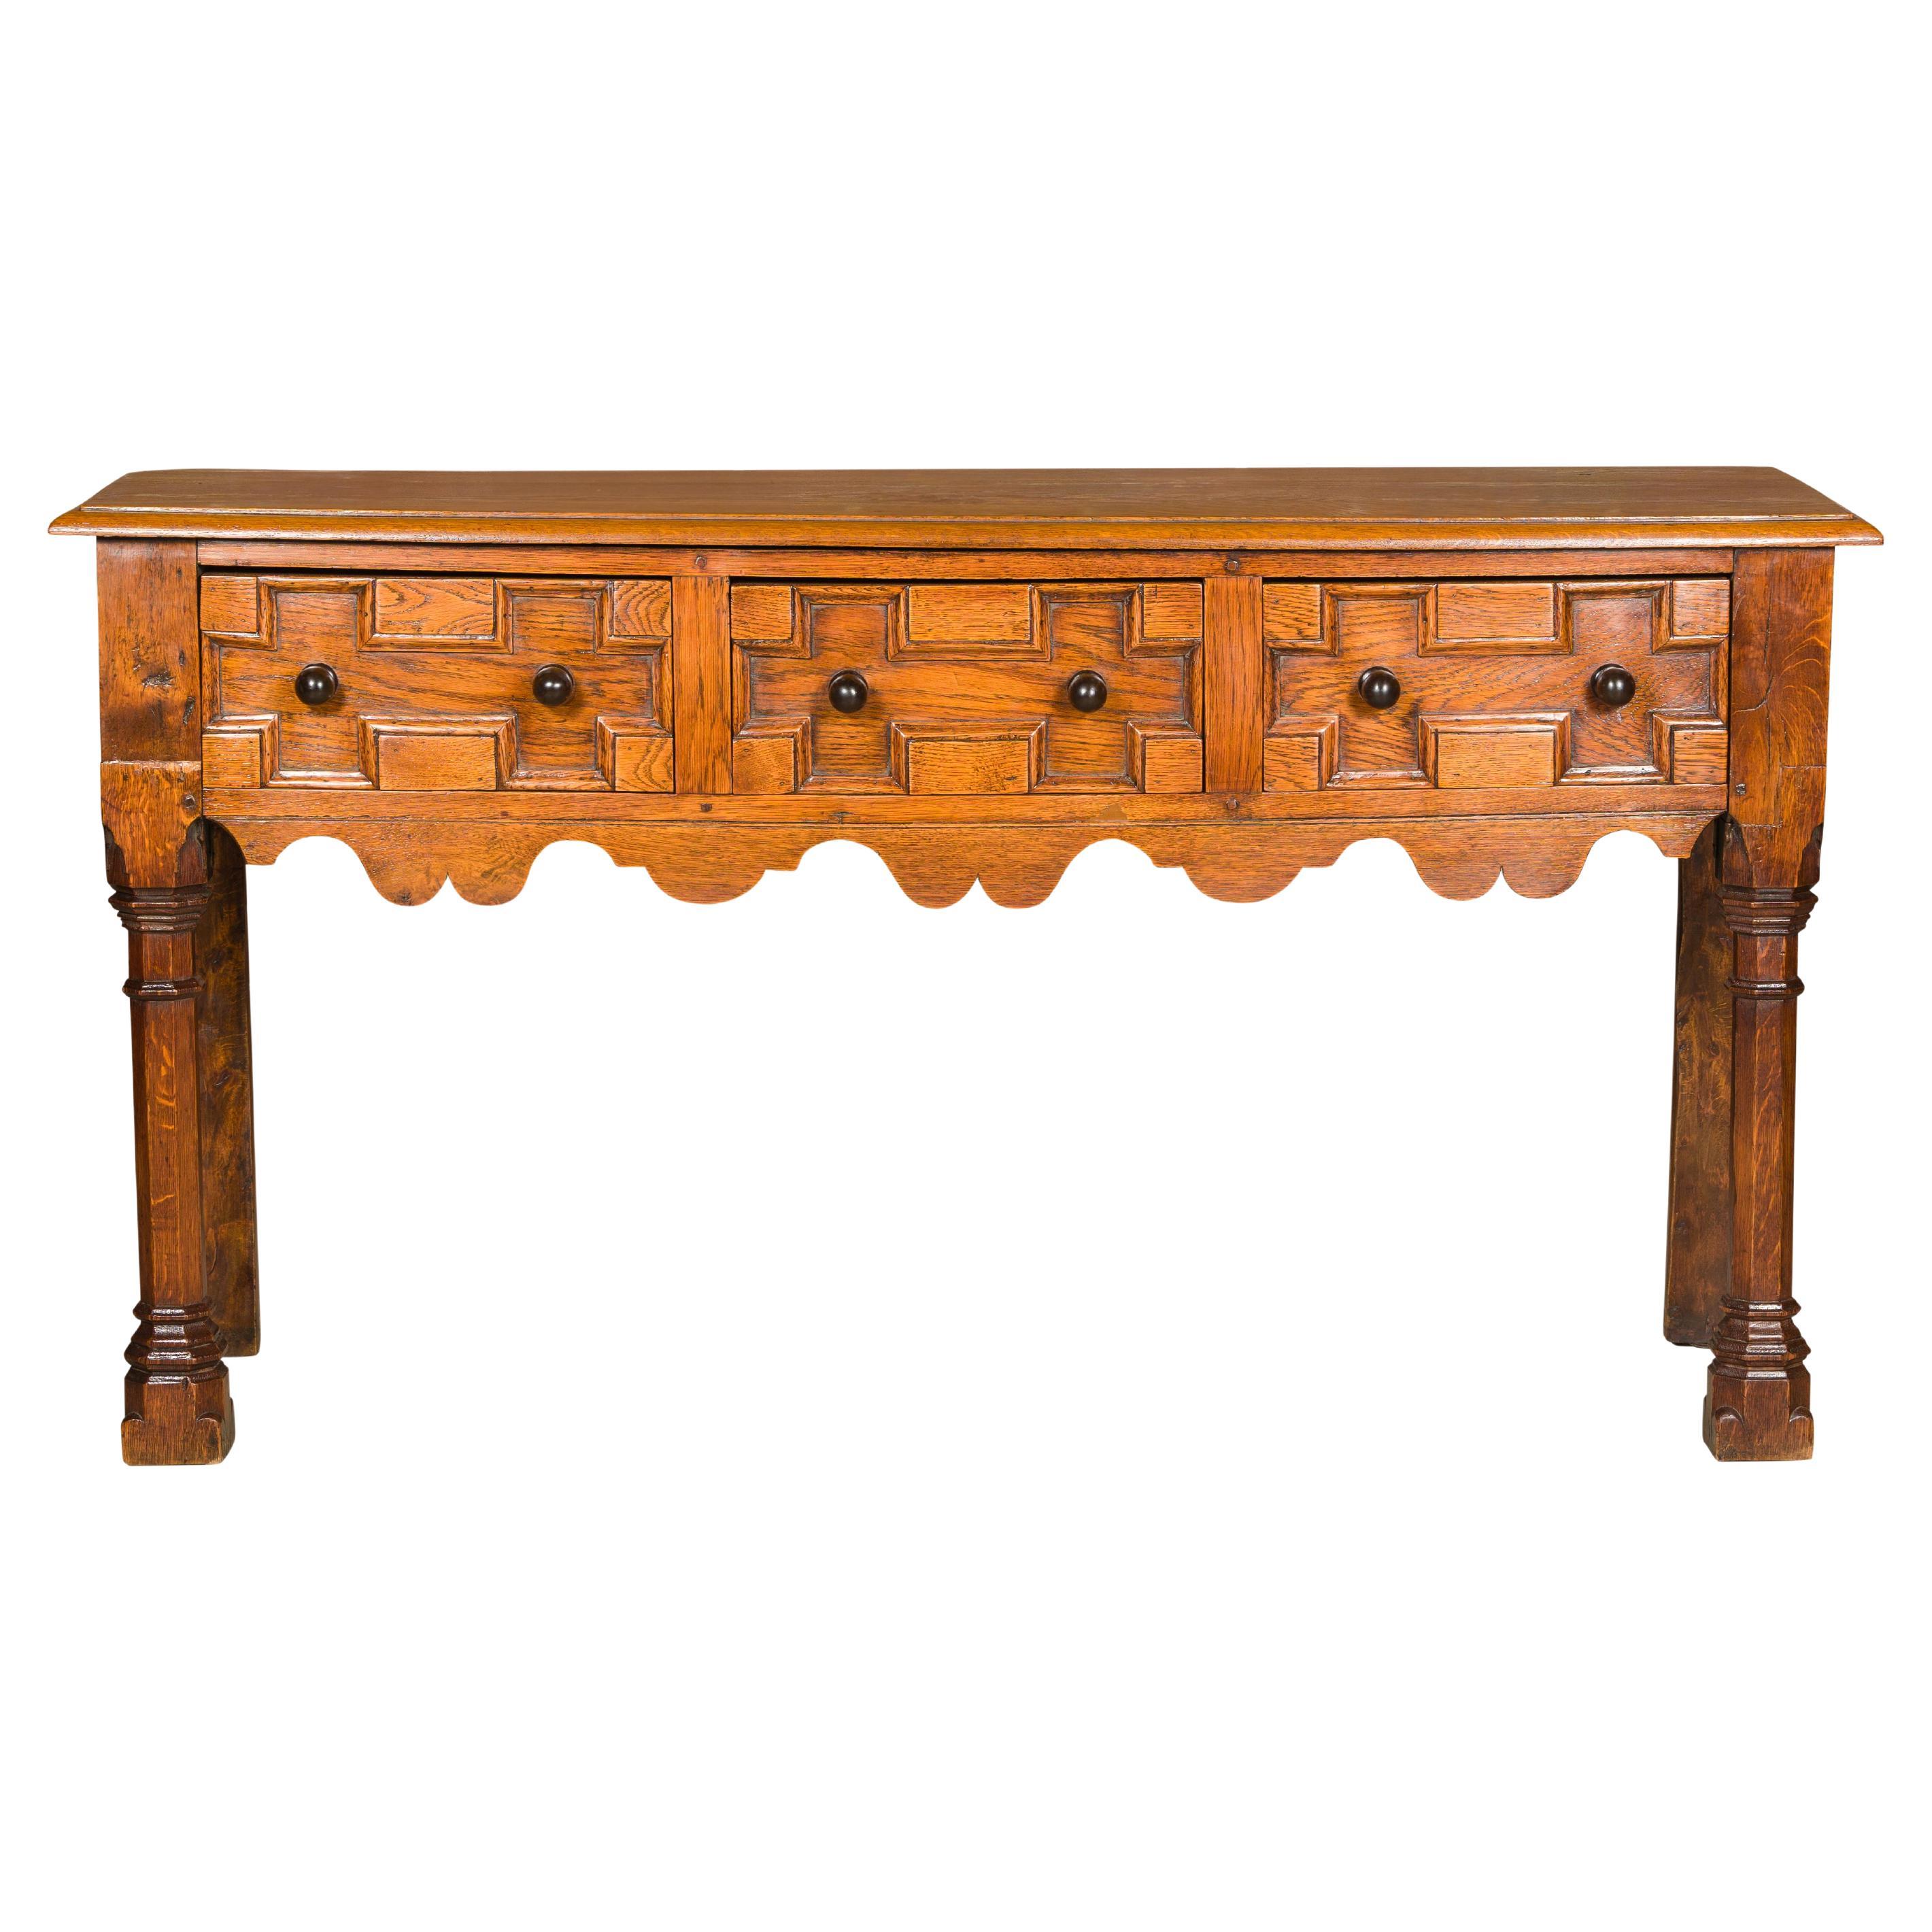 English Oak 19th Century Geometric Front Dresser Base with Three Drawers For Sale